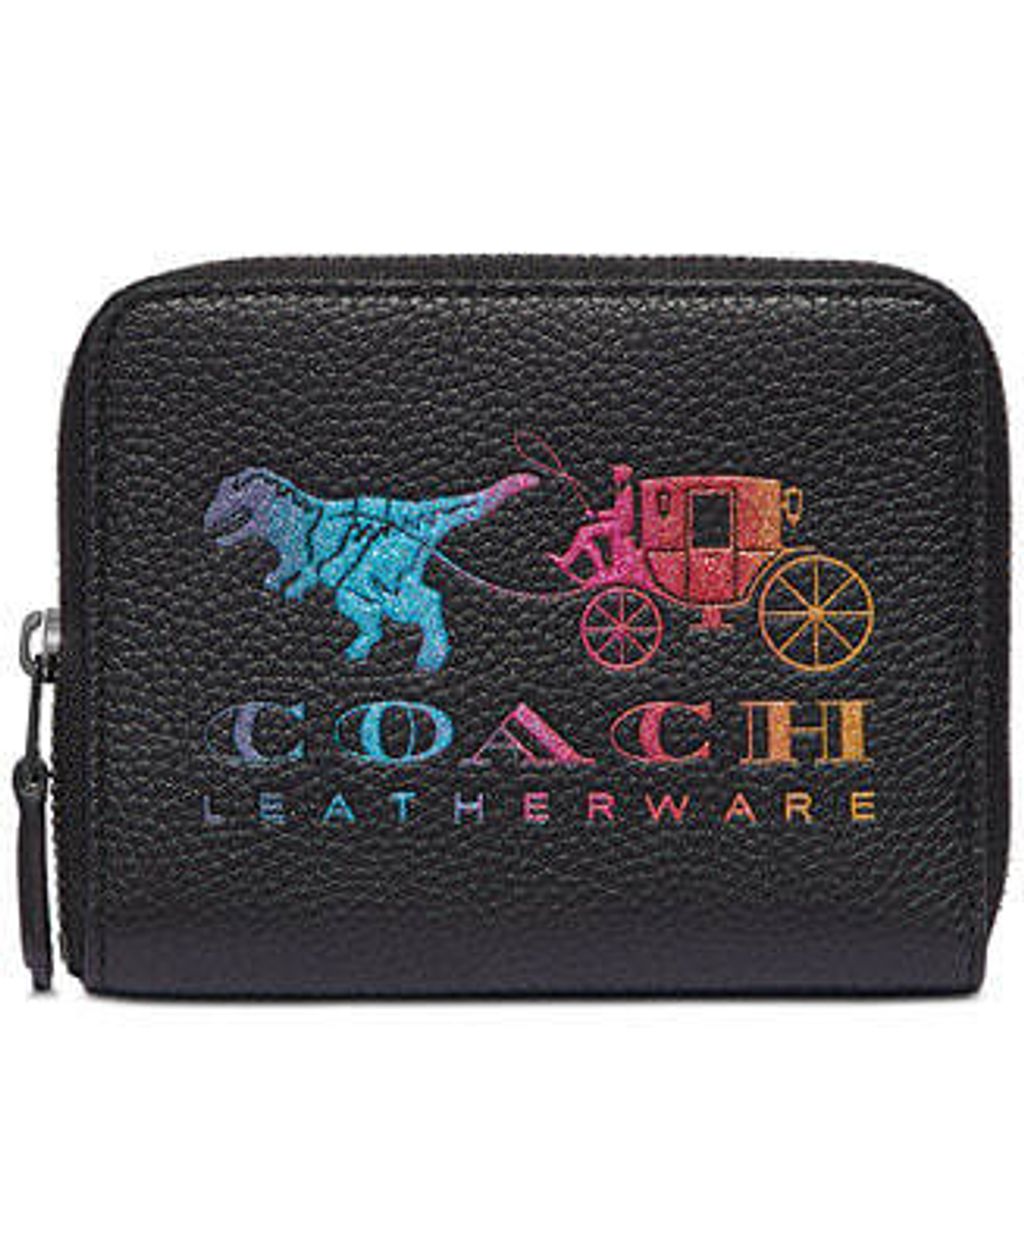 handbagbranded.com getlush outlet personalshopper usa malaysia ready stock coach malaysia Rexy And Carriage Small Zip Around Leather Wallet 4